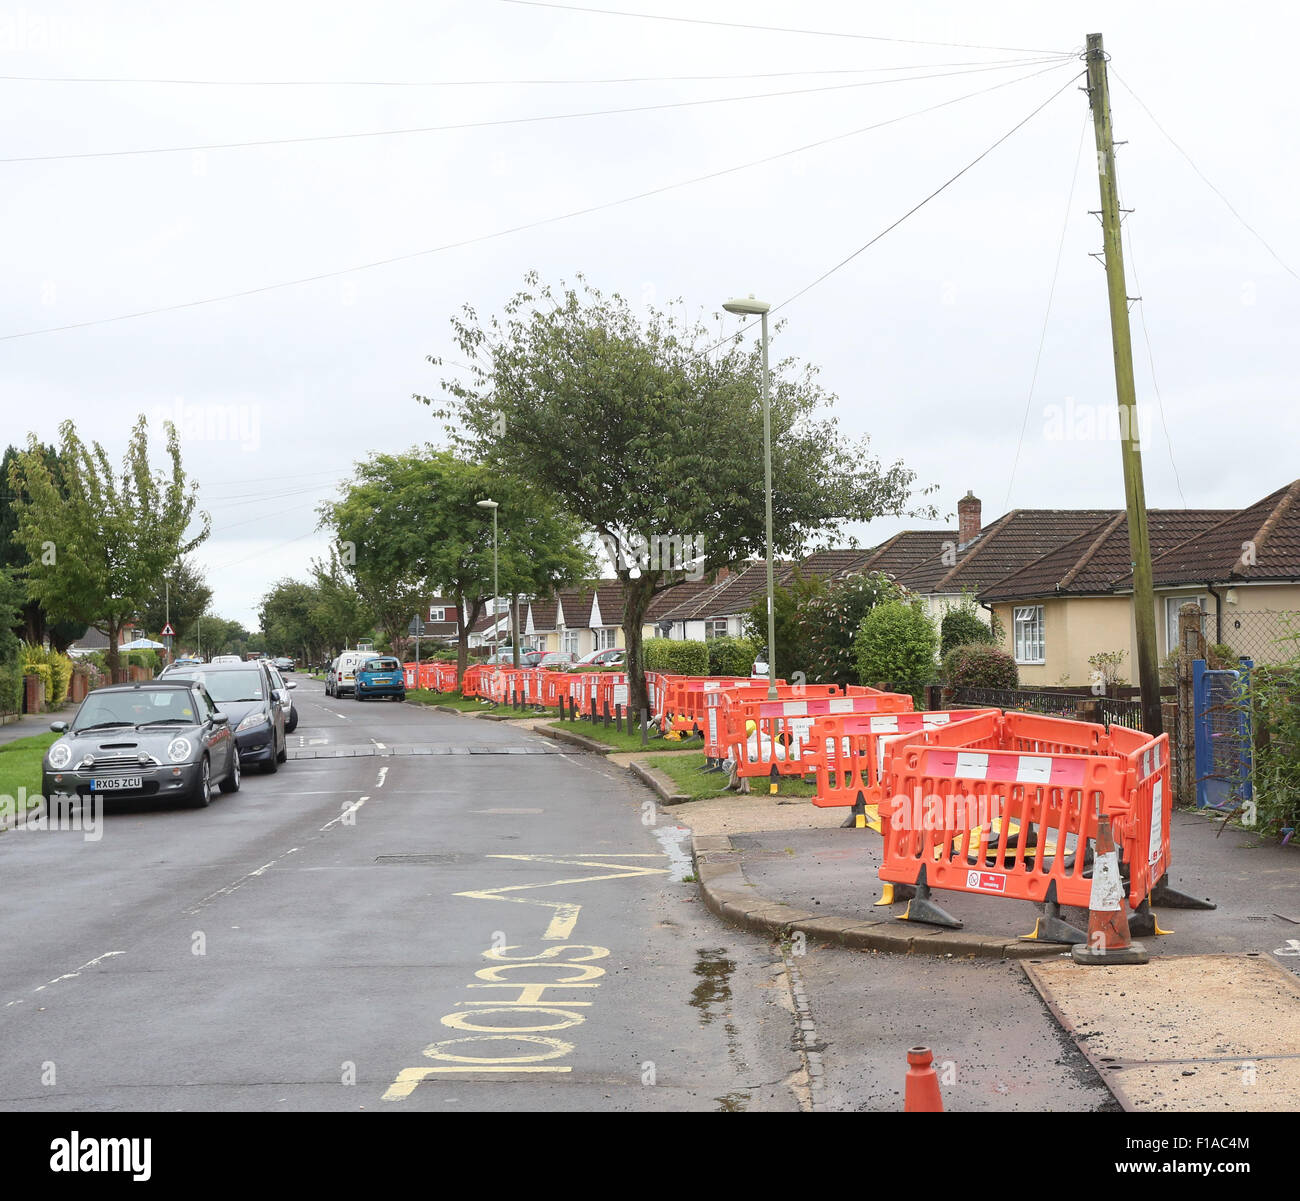 Bridgemary, UK. 31st August, 2015. Gas Works outside  Bedhenham Road Bridgemary  residents were enraged this week after a three-month gas  main replacement project began outside a primary school in the first week of term.  Southern Gas Network contractors where  due to begin the project in Bridgemary on August 7, but delays meant the road did not start to be dug up until August 20   The scheme has been installing new gas main from Bramer Road to  the junction of the Bridgemary Avenue  close to The Bedenham Primary School. Credit: UKNIP / Alamy Live News Stock Photo